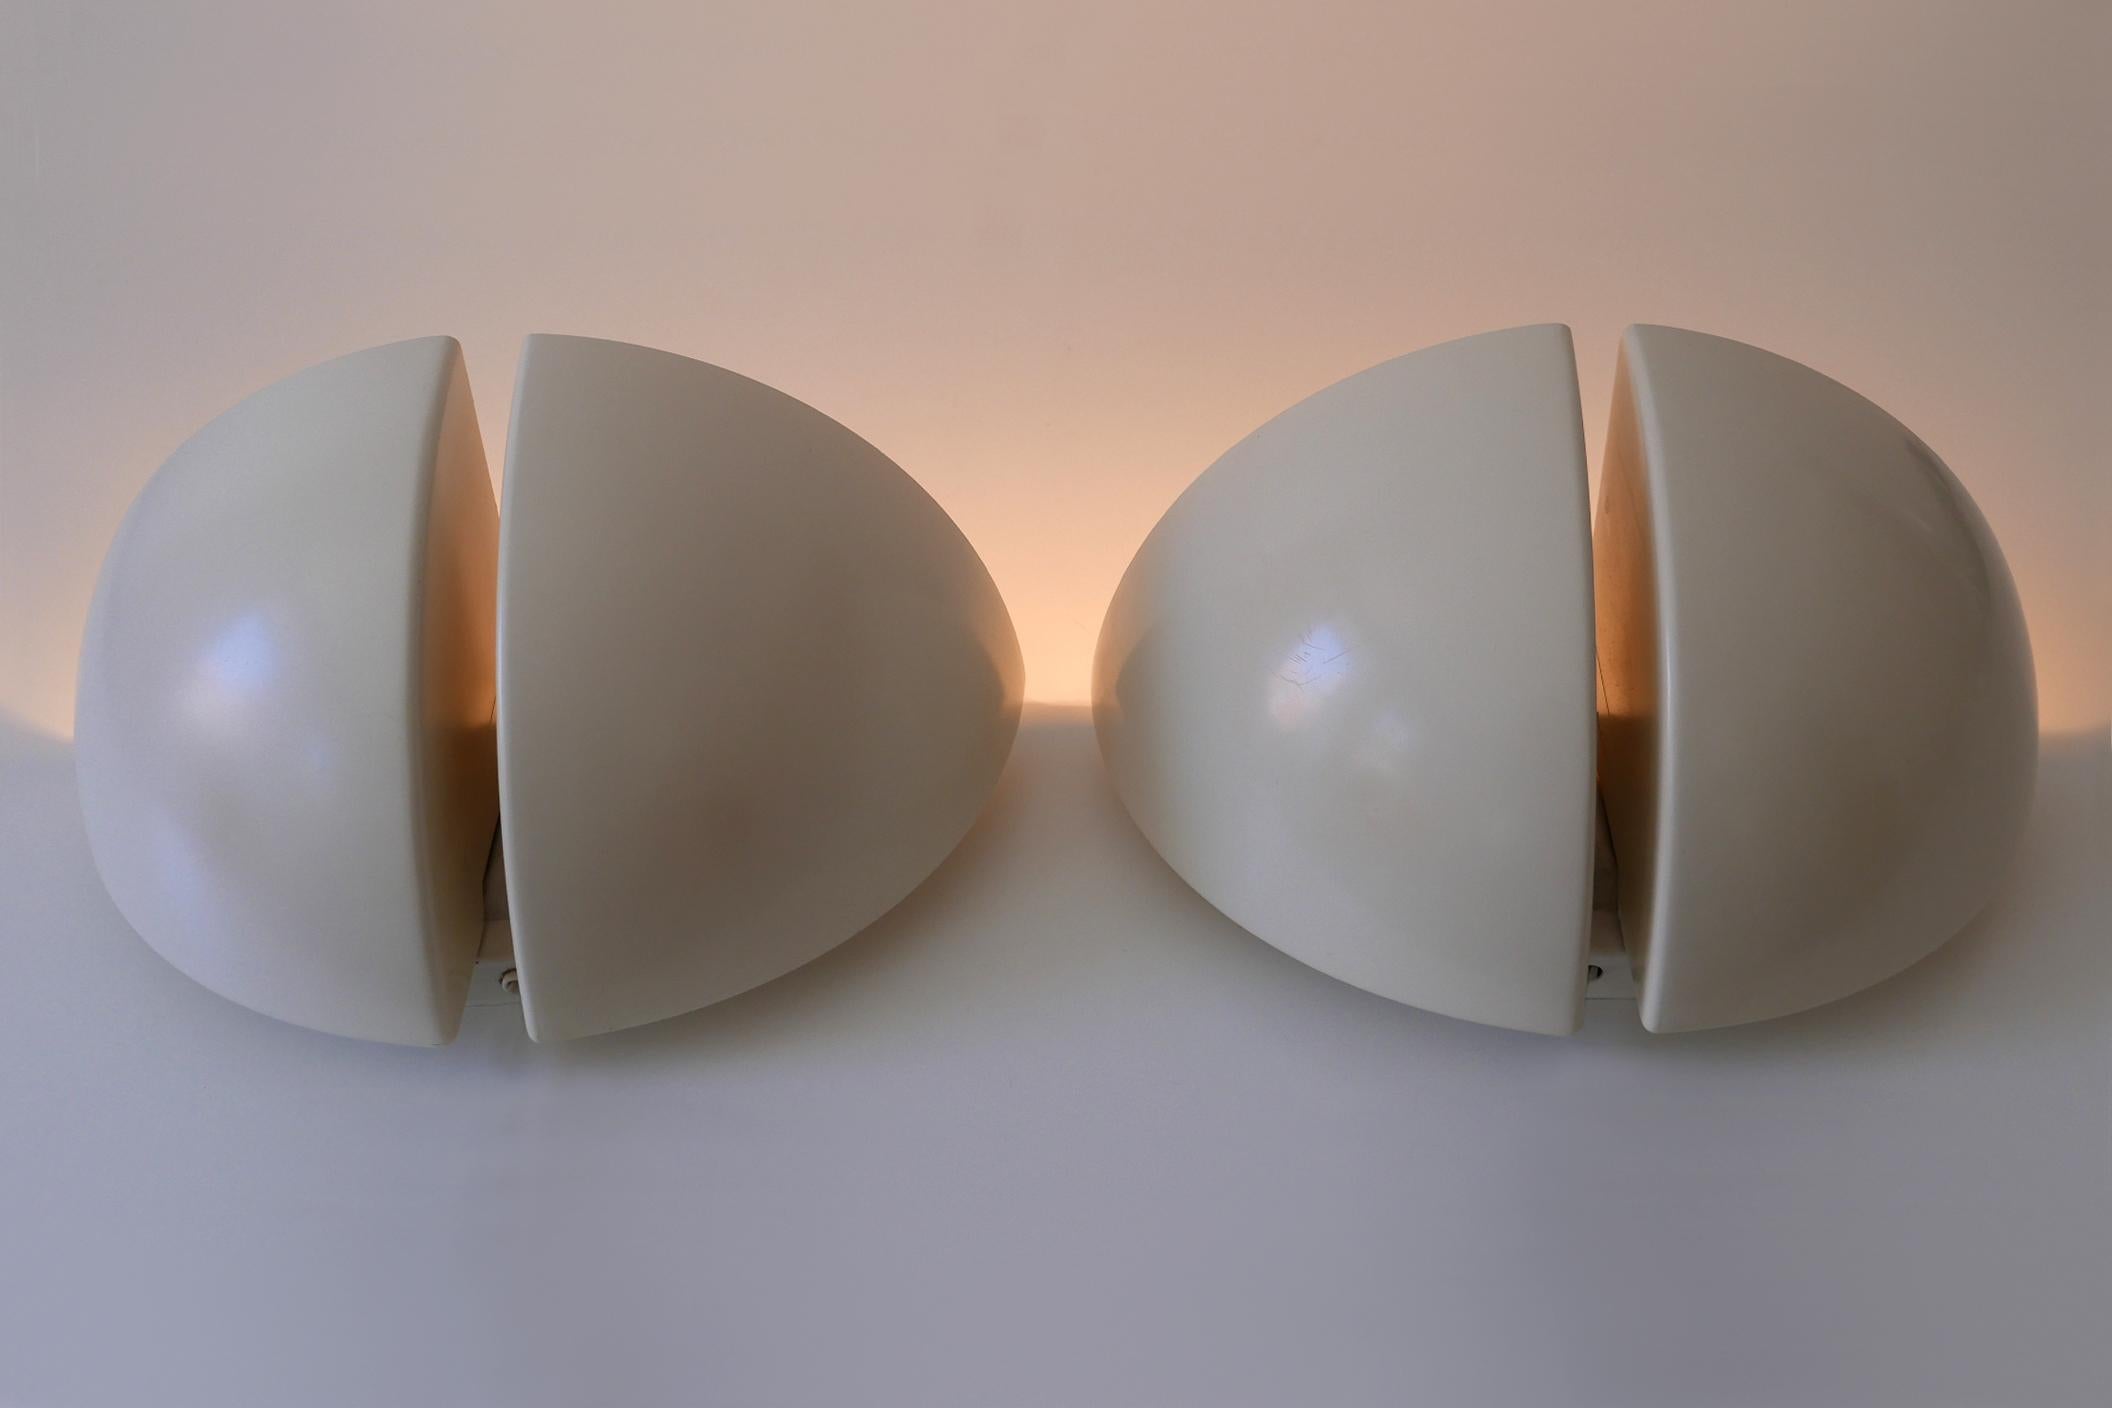 Metal Set of Two RAAK Octavo Wall Lamps or Sconces by RAAK, Netherlands, 1970s For Sale